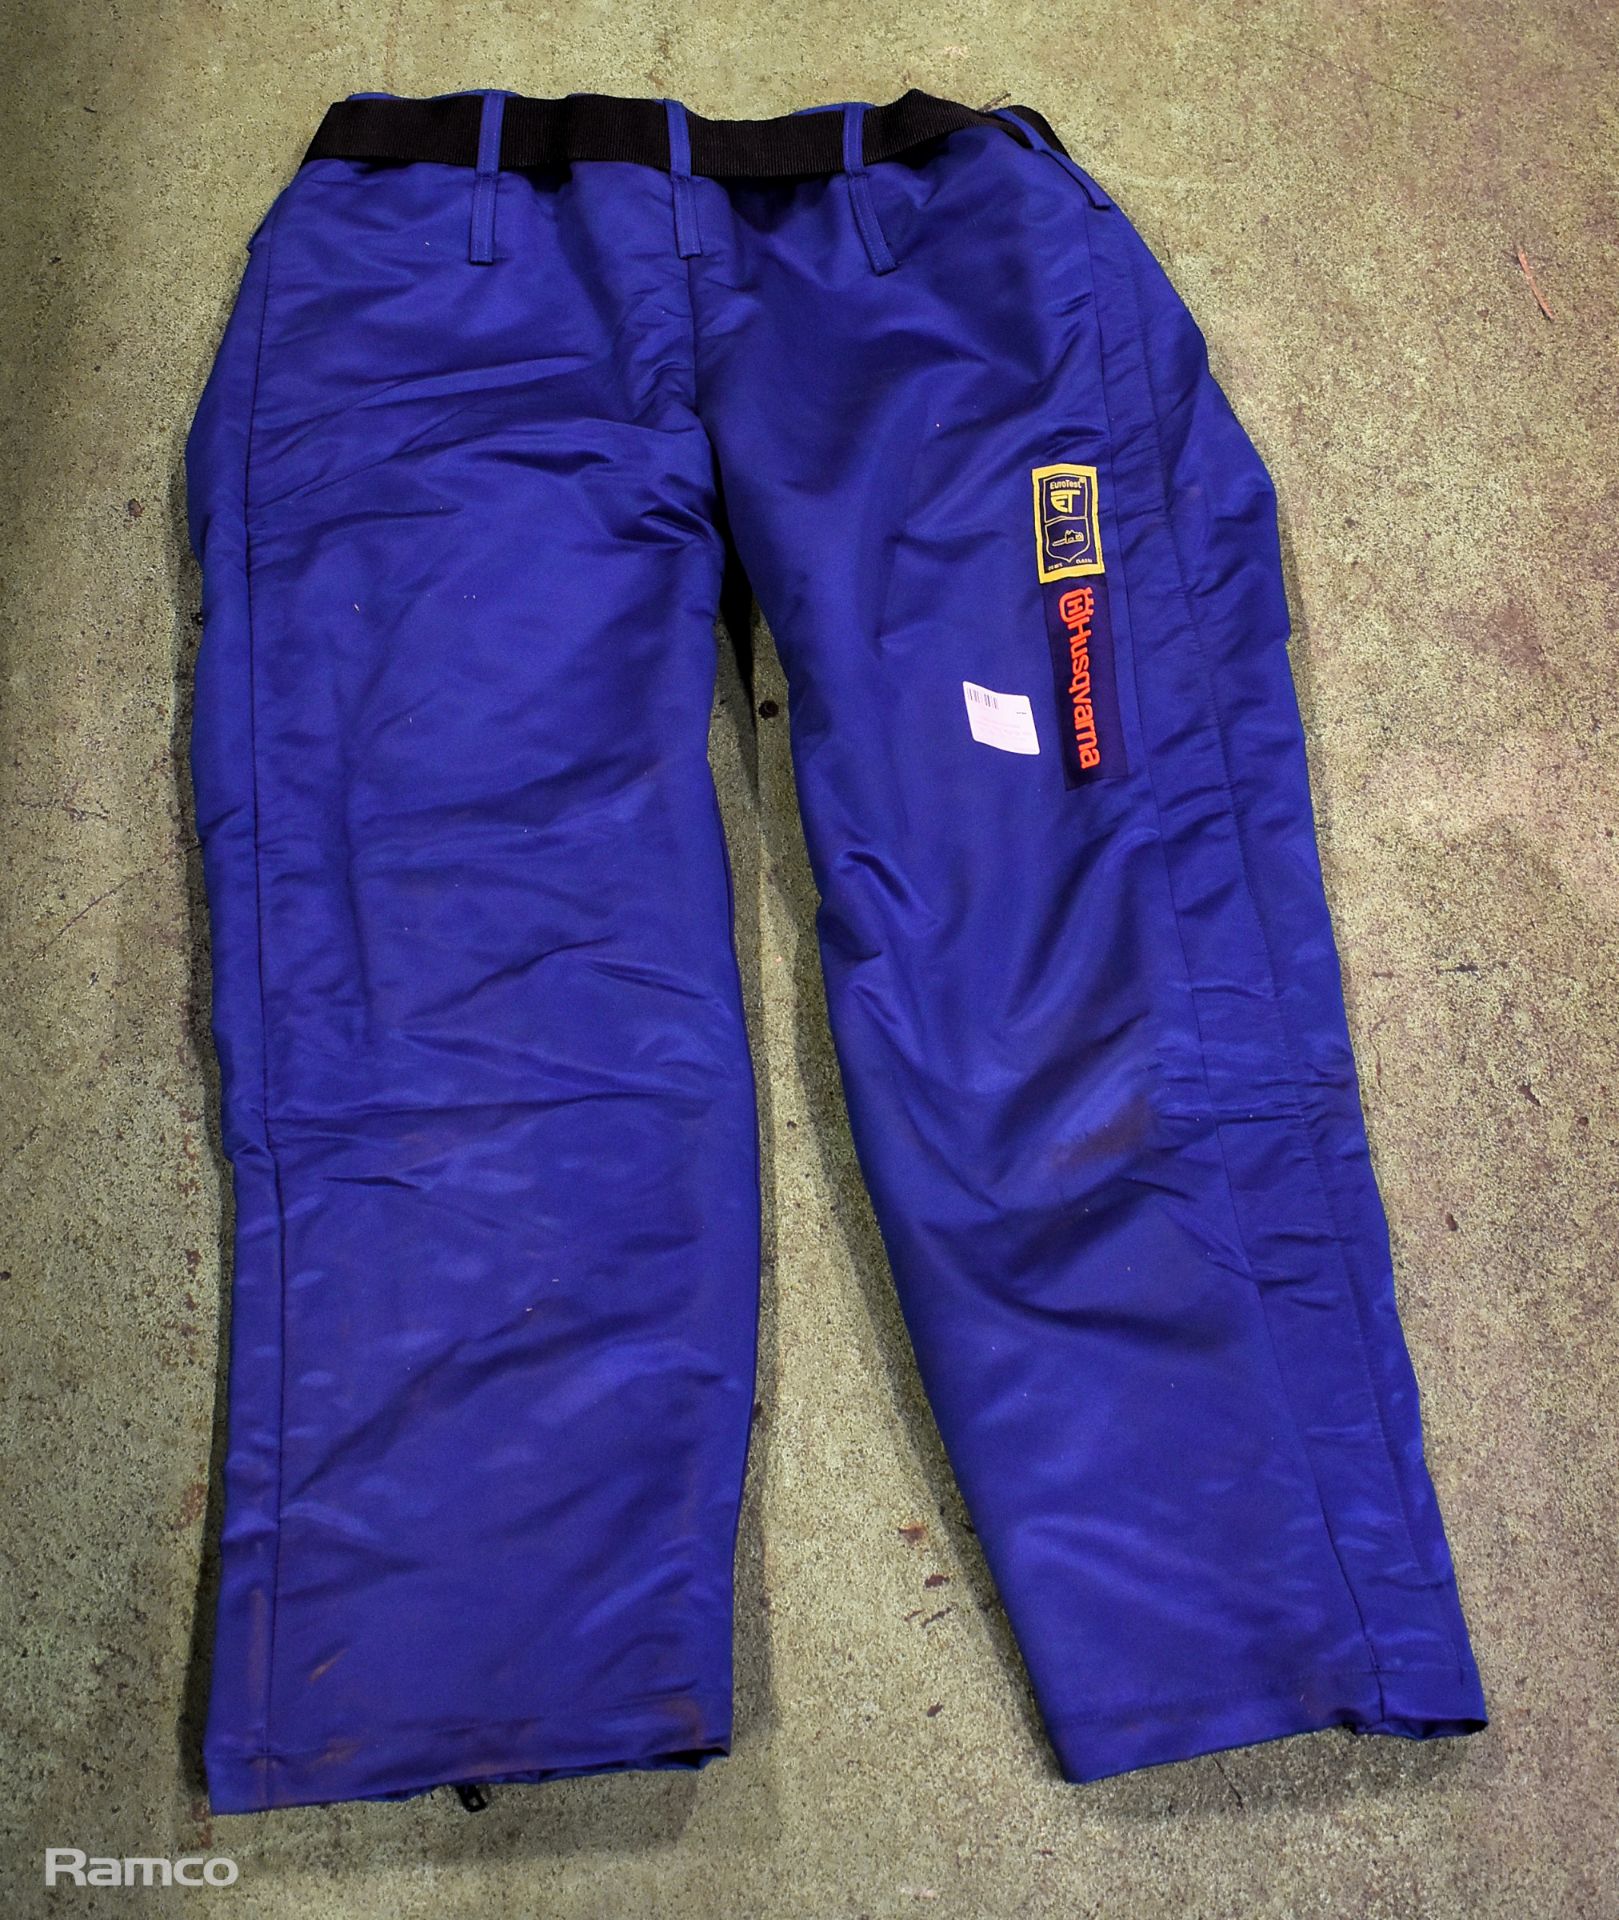 2x Husqvarna chainsaw safety leggings, 2x Oregon operators safety spats - see description - Image 8 of 8